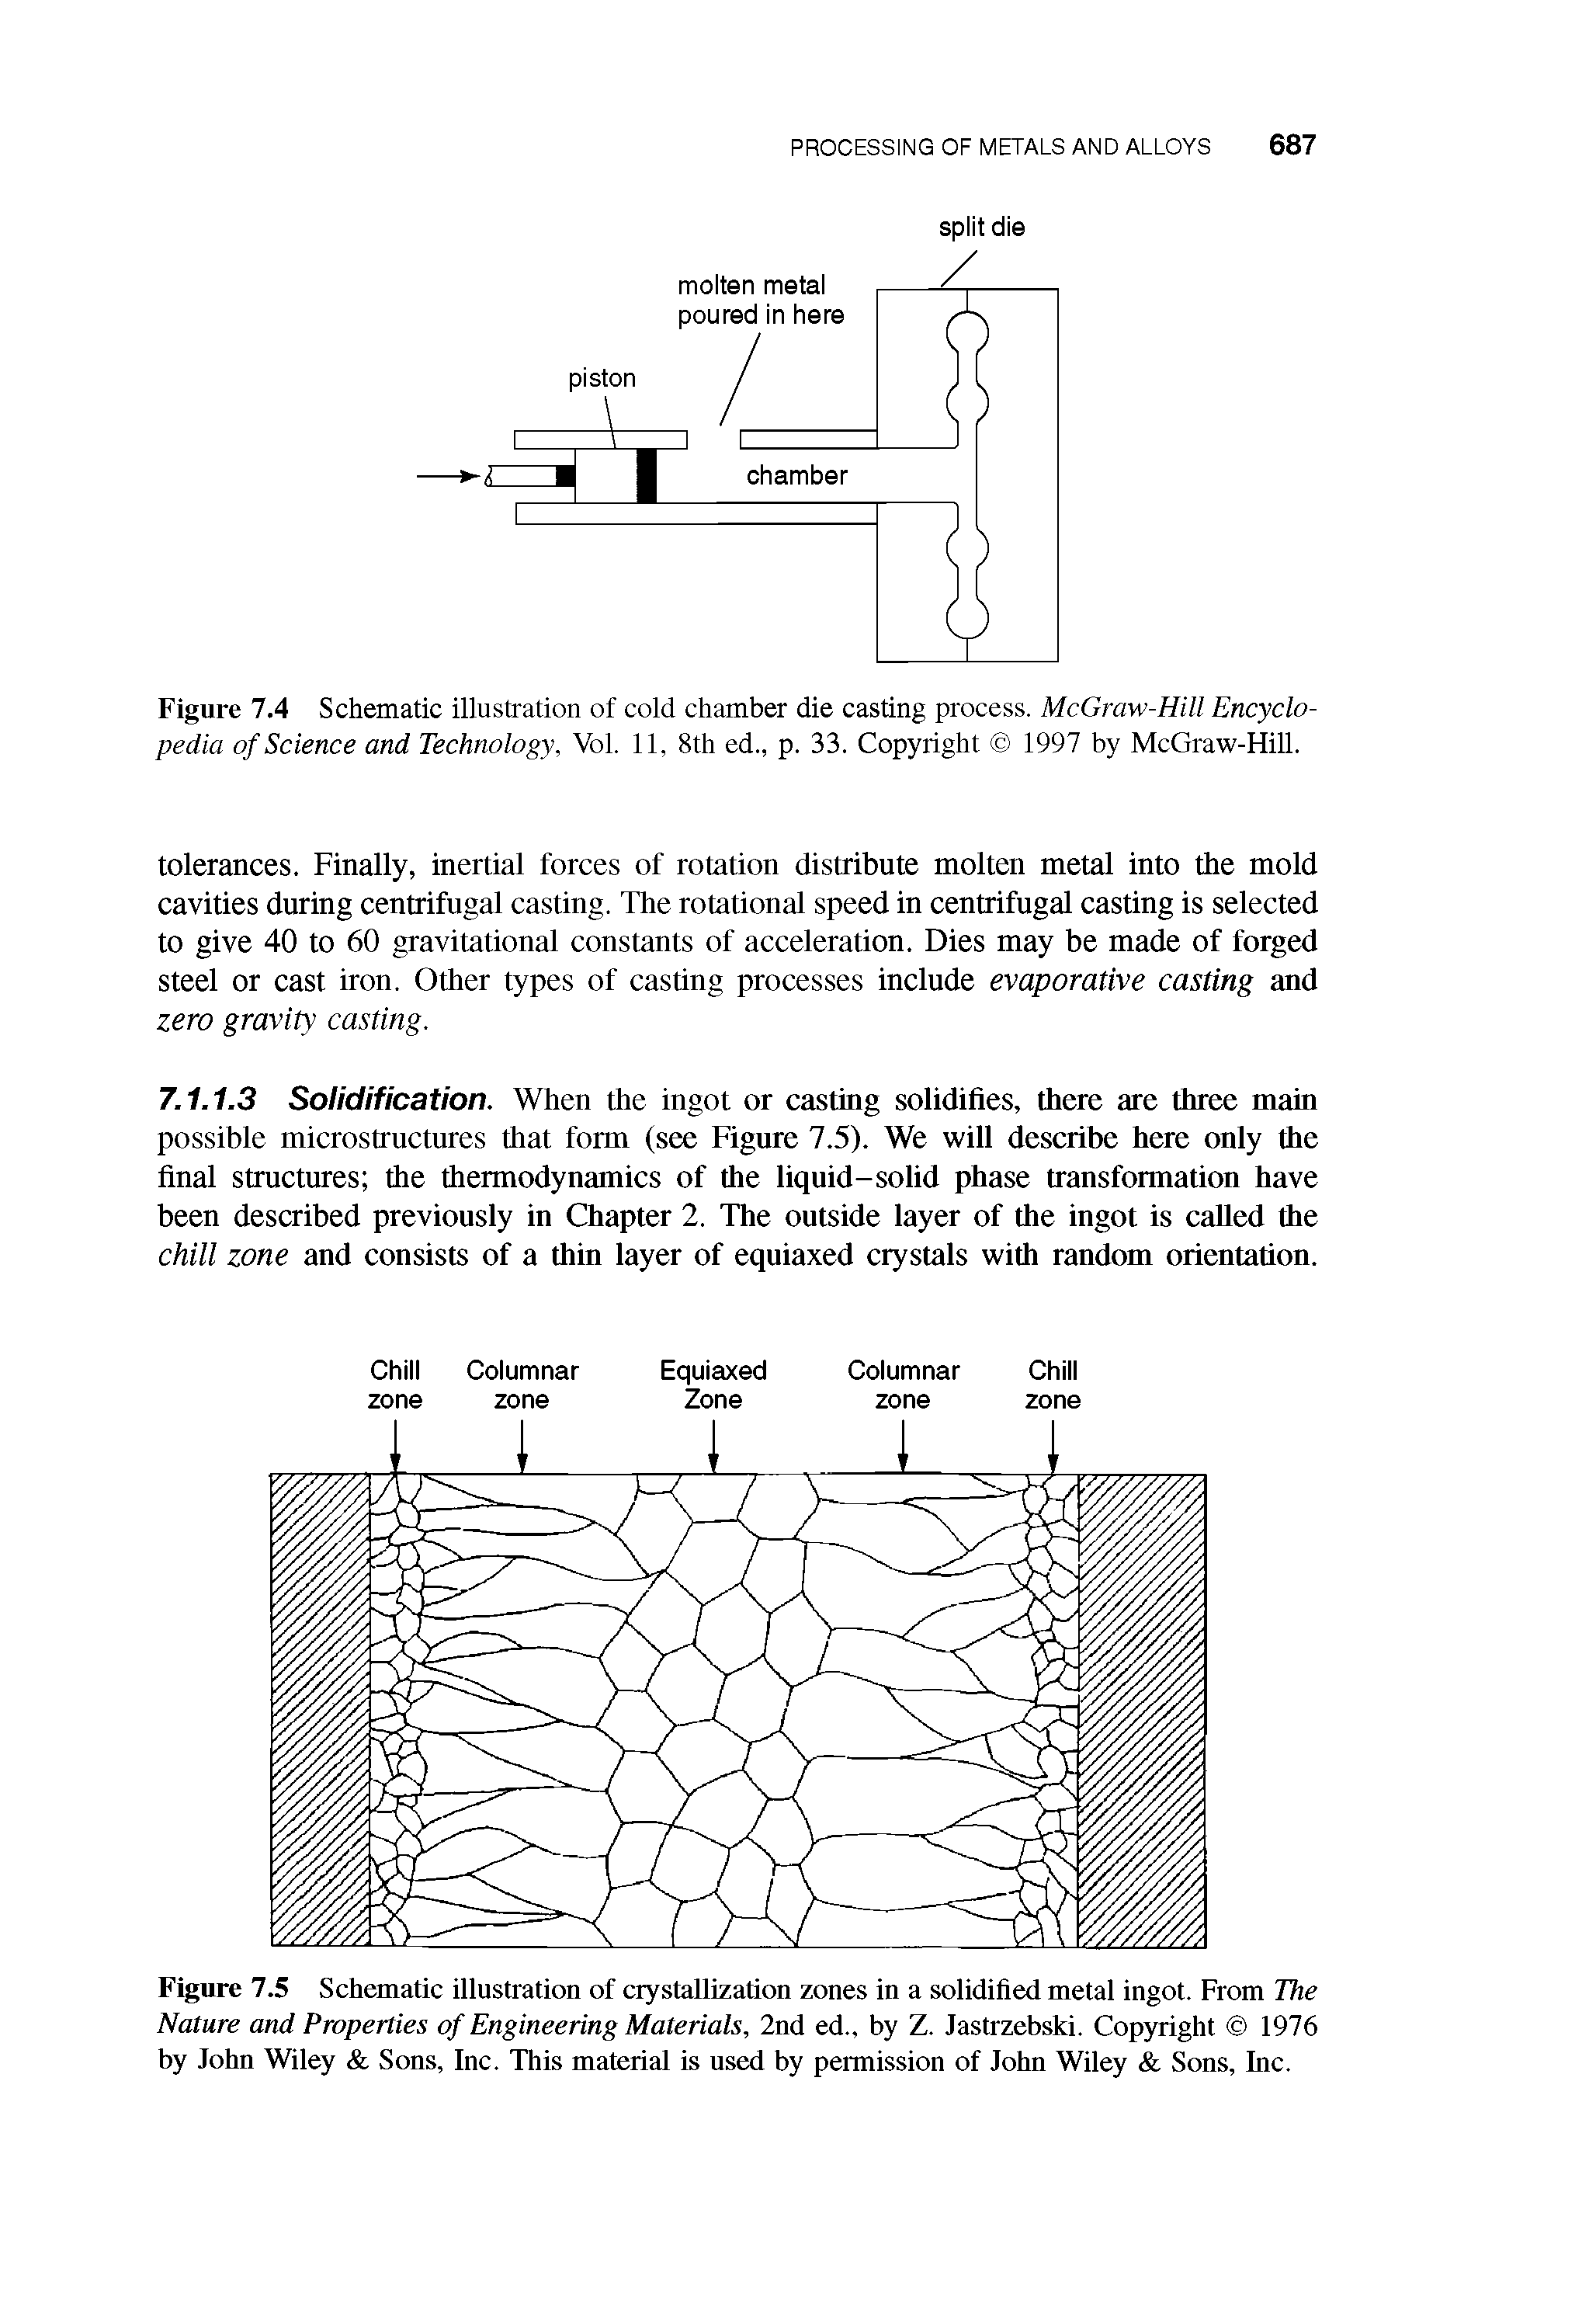 Figure 7.5 Schematic illustration of crystallization zones in a solidified metal ingot. From The Nature and Properties of Engineering Materials, 2nd ed., by Z. Jastrzebski. Copyright 1976 by John Wiley Sons, Inc. This material is nsed by permission of John Wiley Sons, Inc.